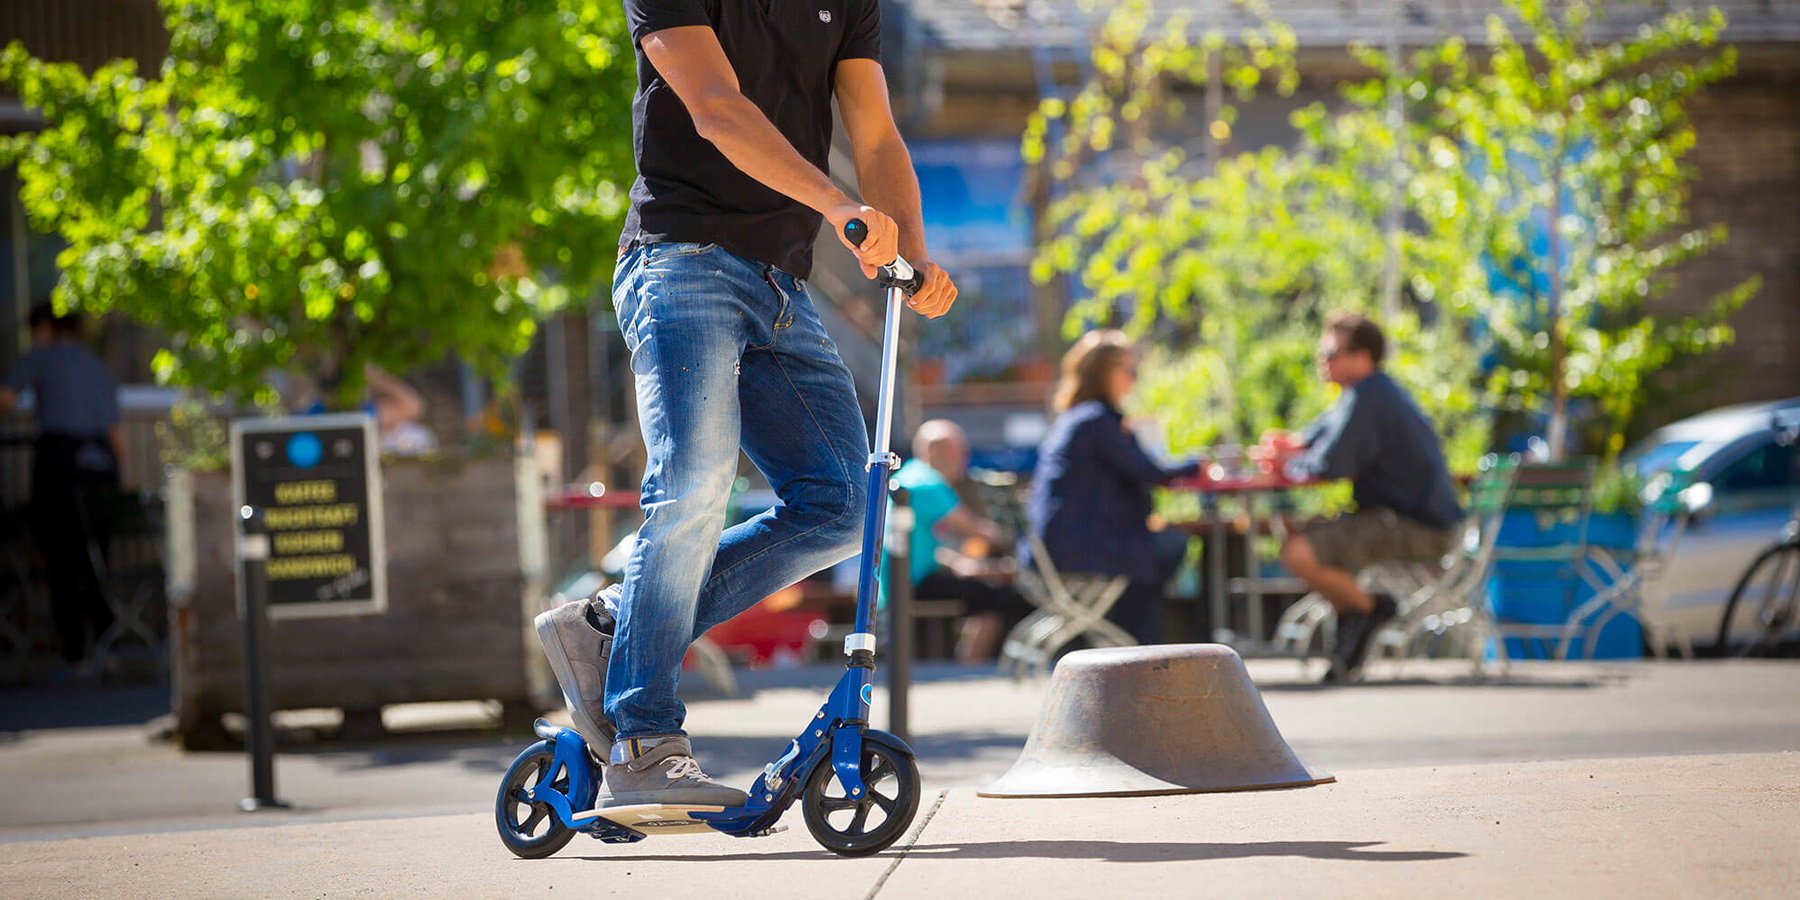 Man riding Micro Flex adult kick scooter with flexible deck